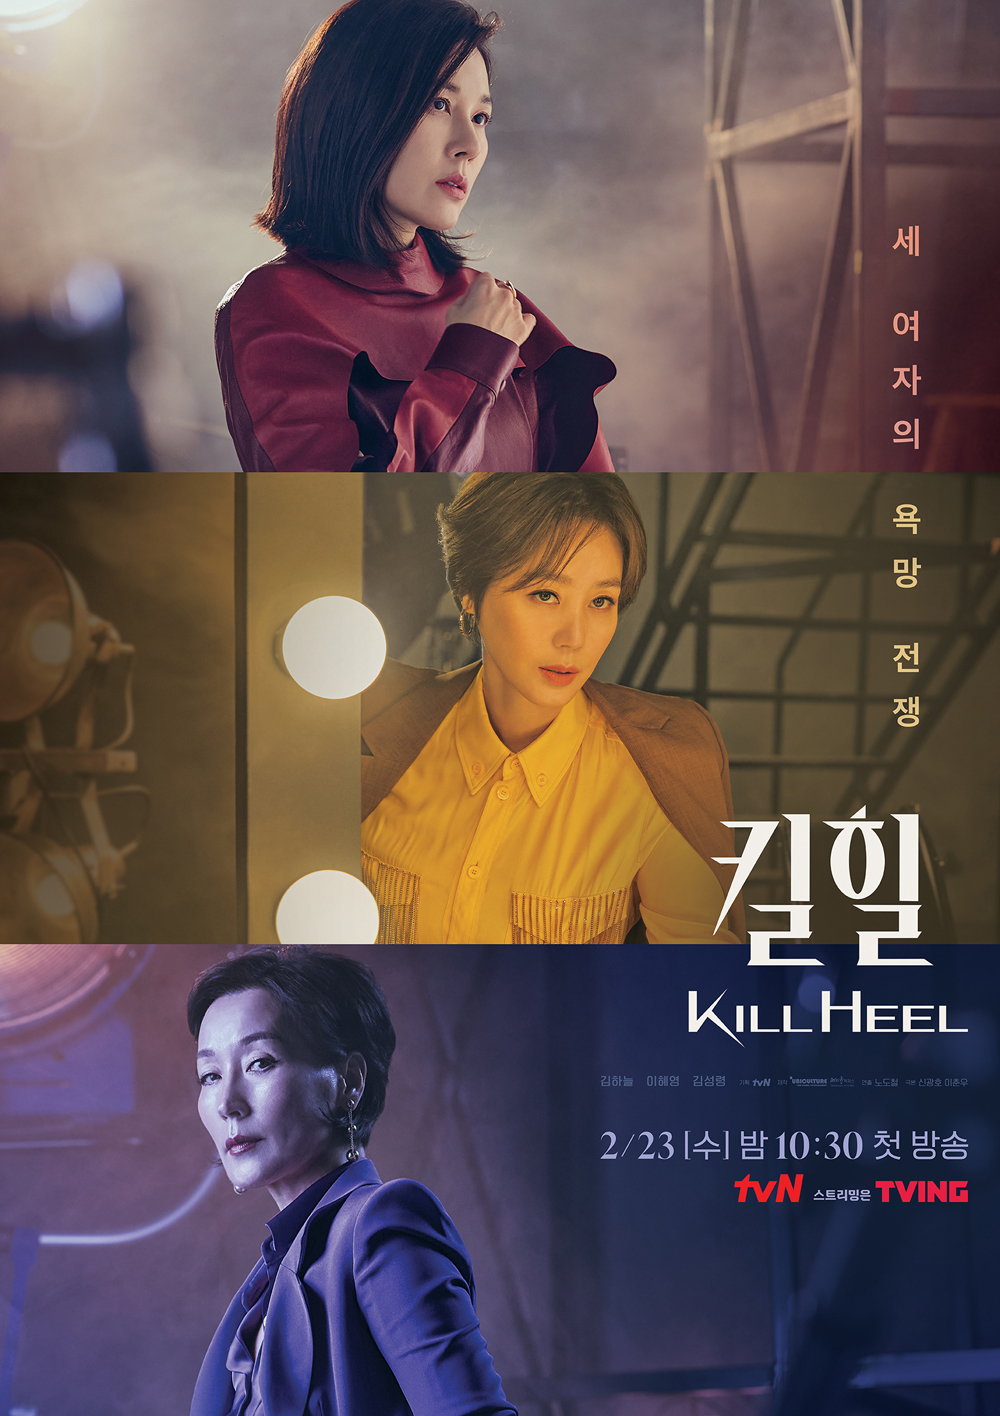 Kim Haneul, Kim Sung-ryung, and Lee Hye-young compete in tvN’s Kill Heel